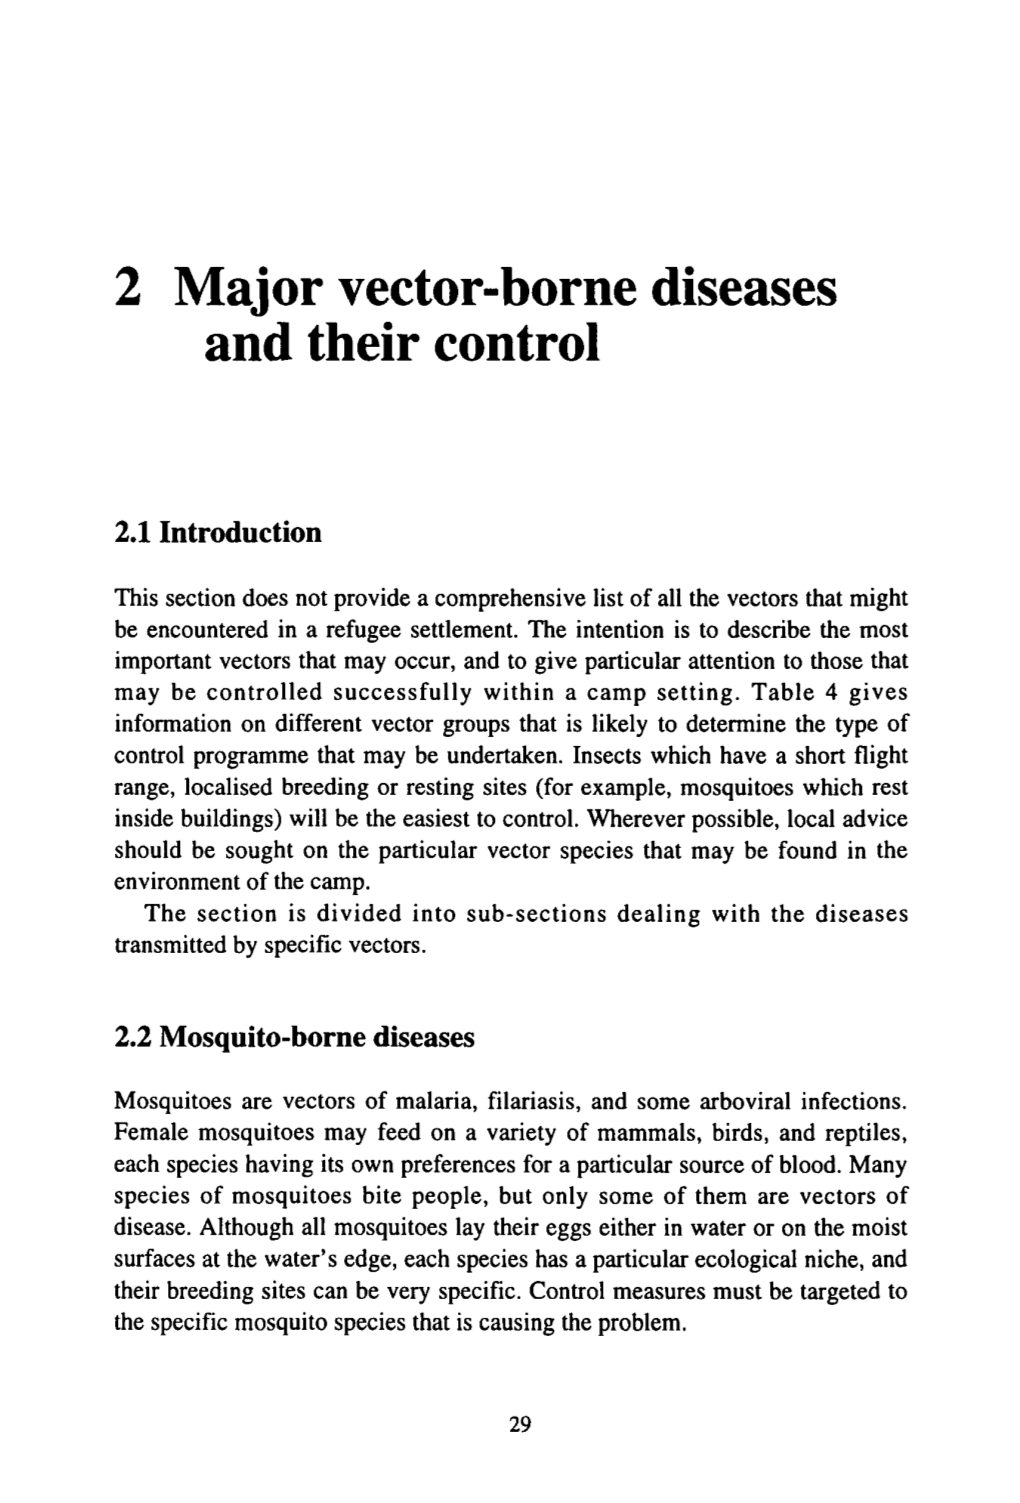 2 Major Vector-Borne Diseases and Their Control